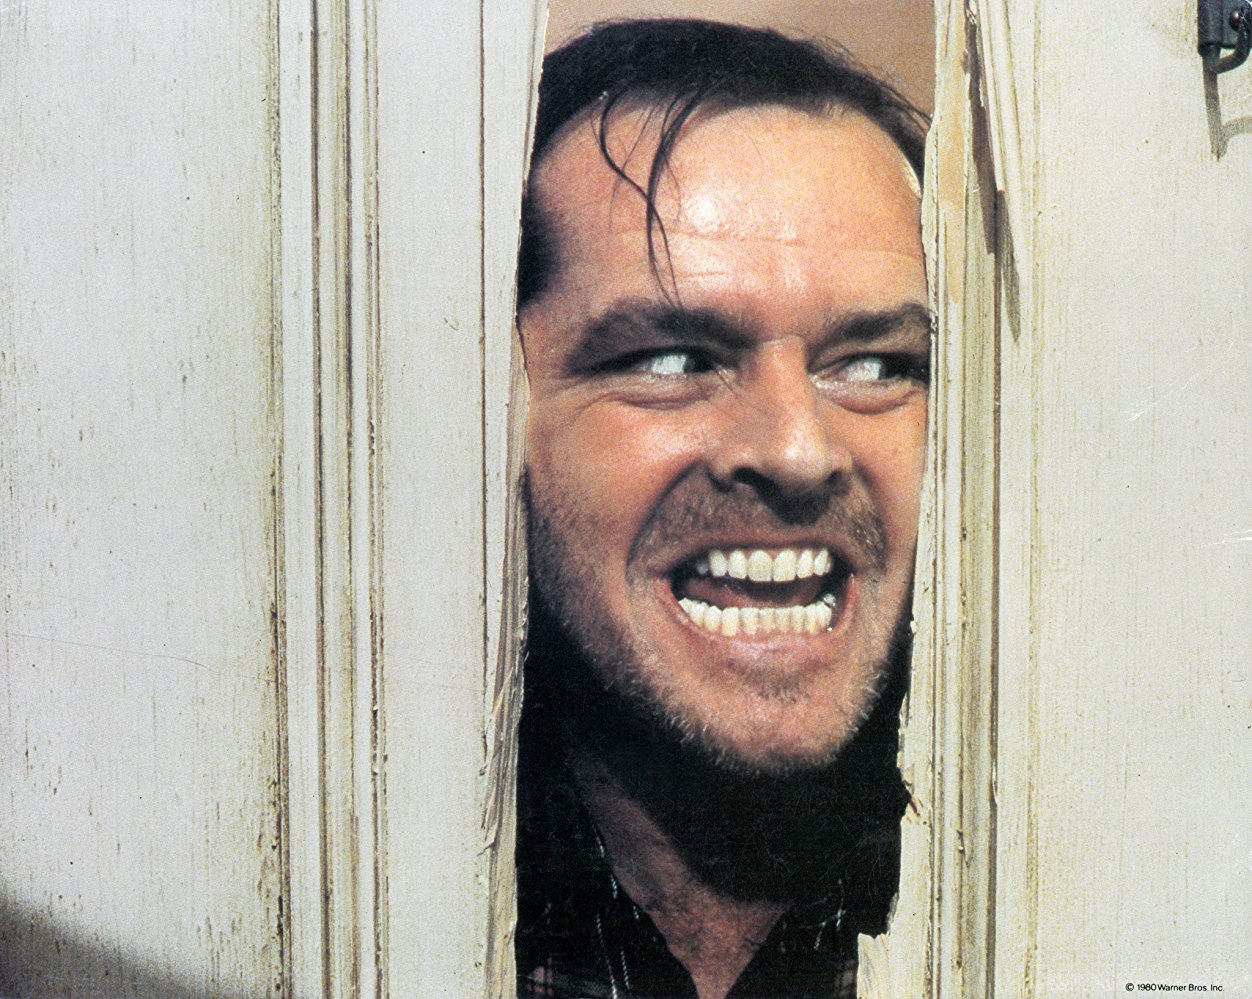 Check into the real-life hotel of horrors that inspired 'The Shining